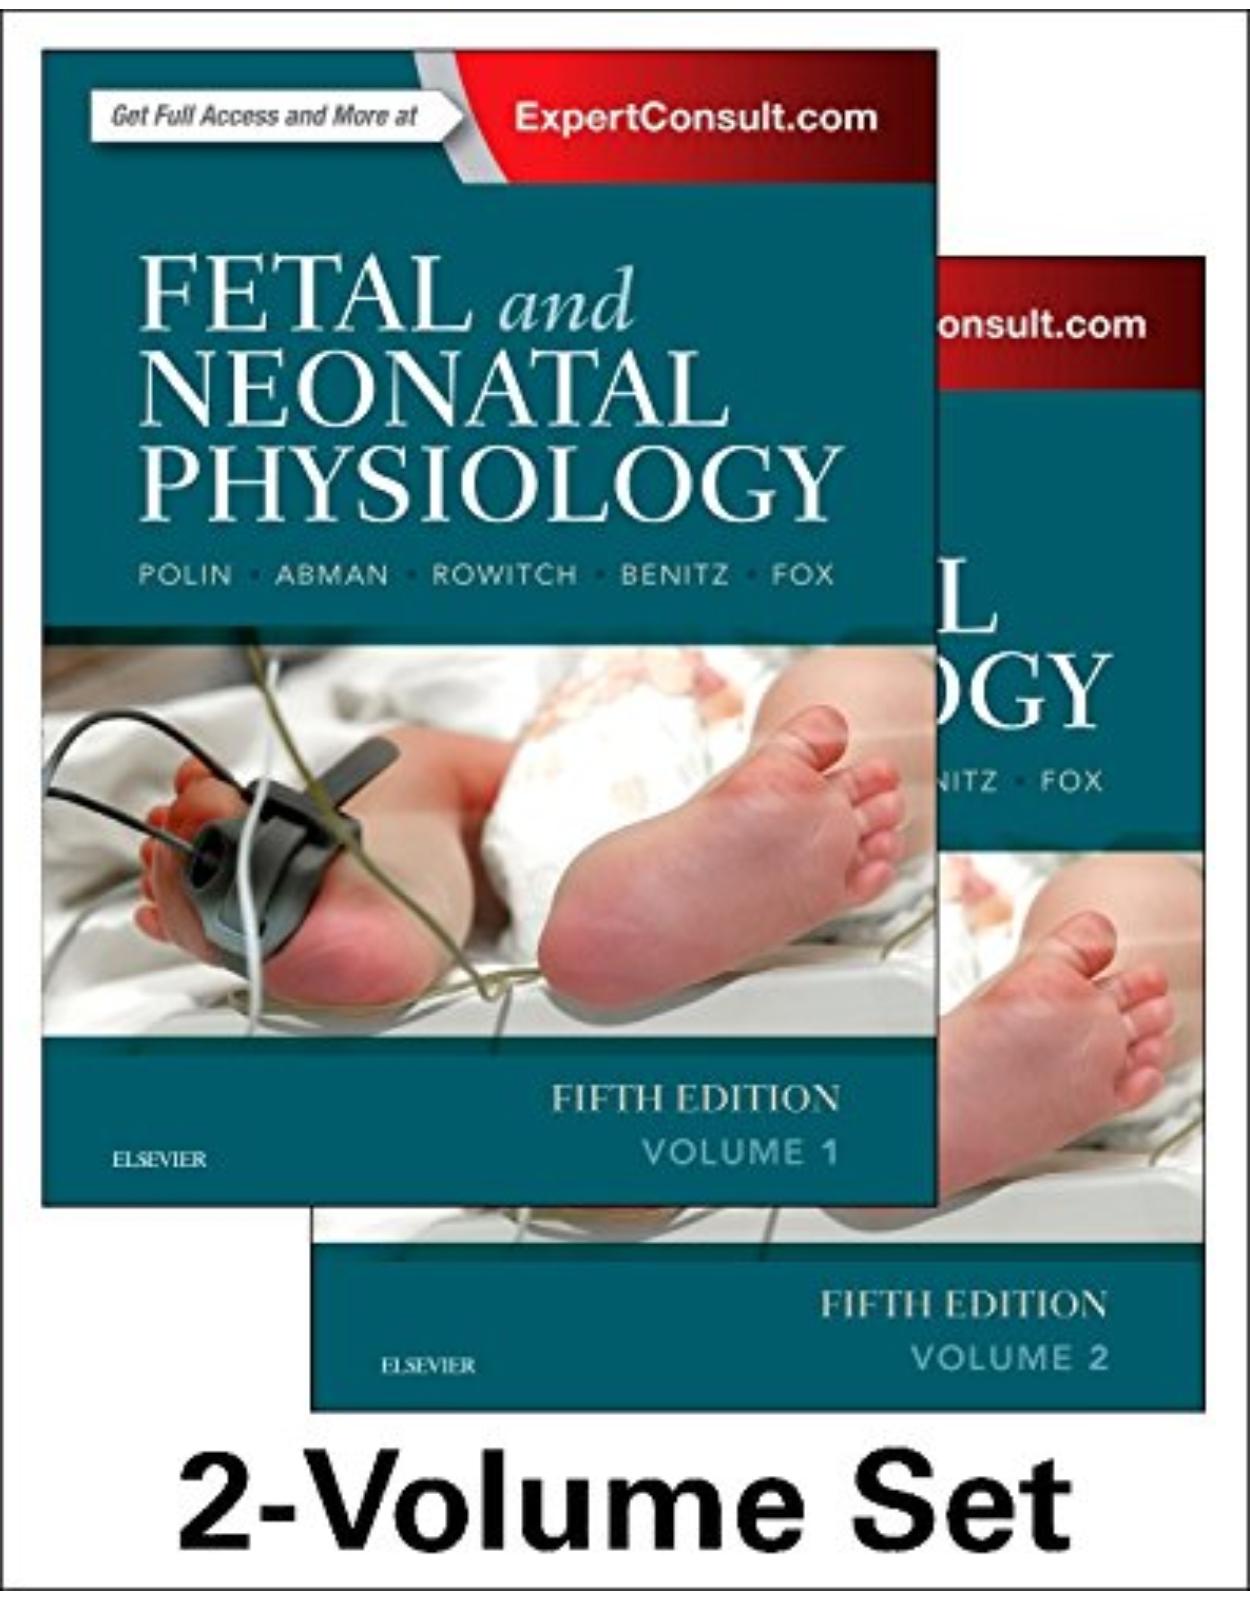 Fetal and Neonatal Physiology, 2-Volume Set, 5th Edition